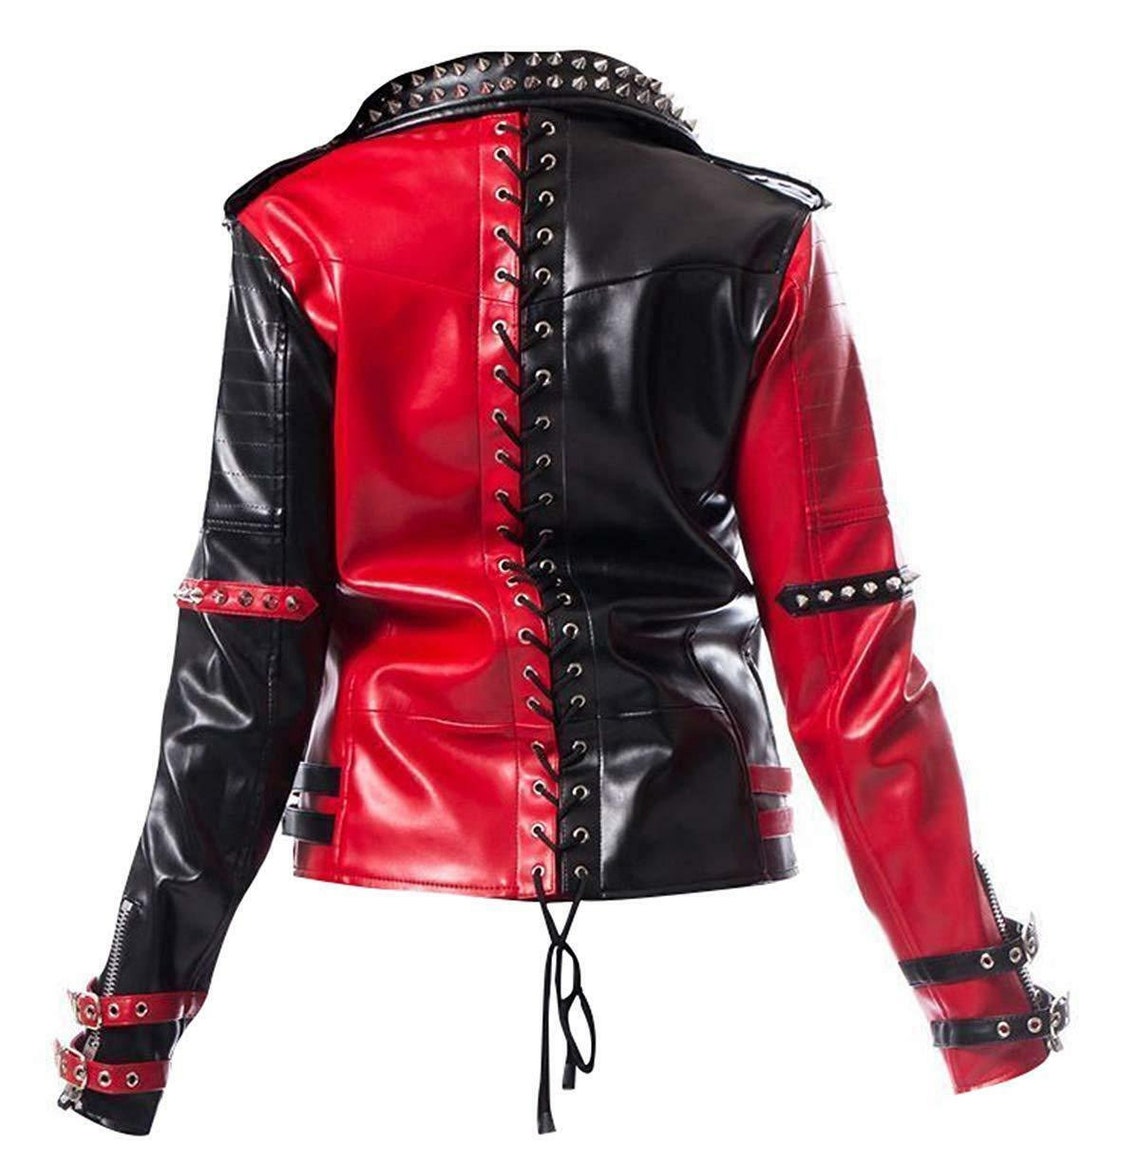 Women Black Leather Studded and Spiked motorcycle jacket Biker studded fashion jacket Studded Biker Black & Red Leather Jacket For Women.
Free Worldwide Shipping.
Payment through Paypal and US bank.
DM for further details and placing orders.
#bikerleatherjacket #redleatherjacket